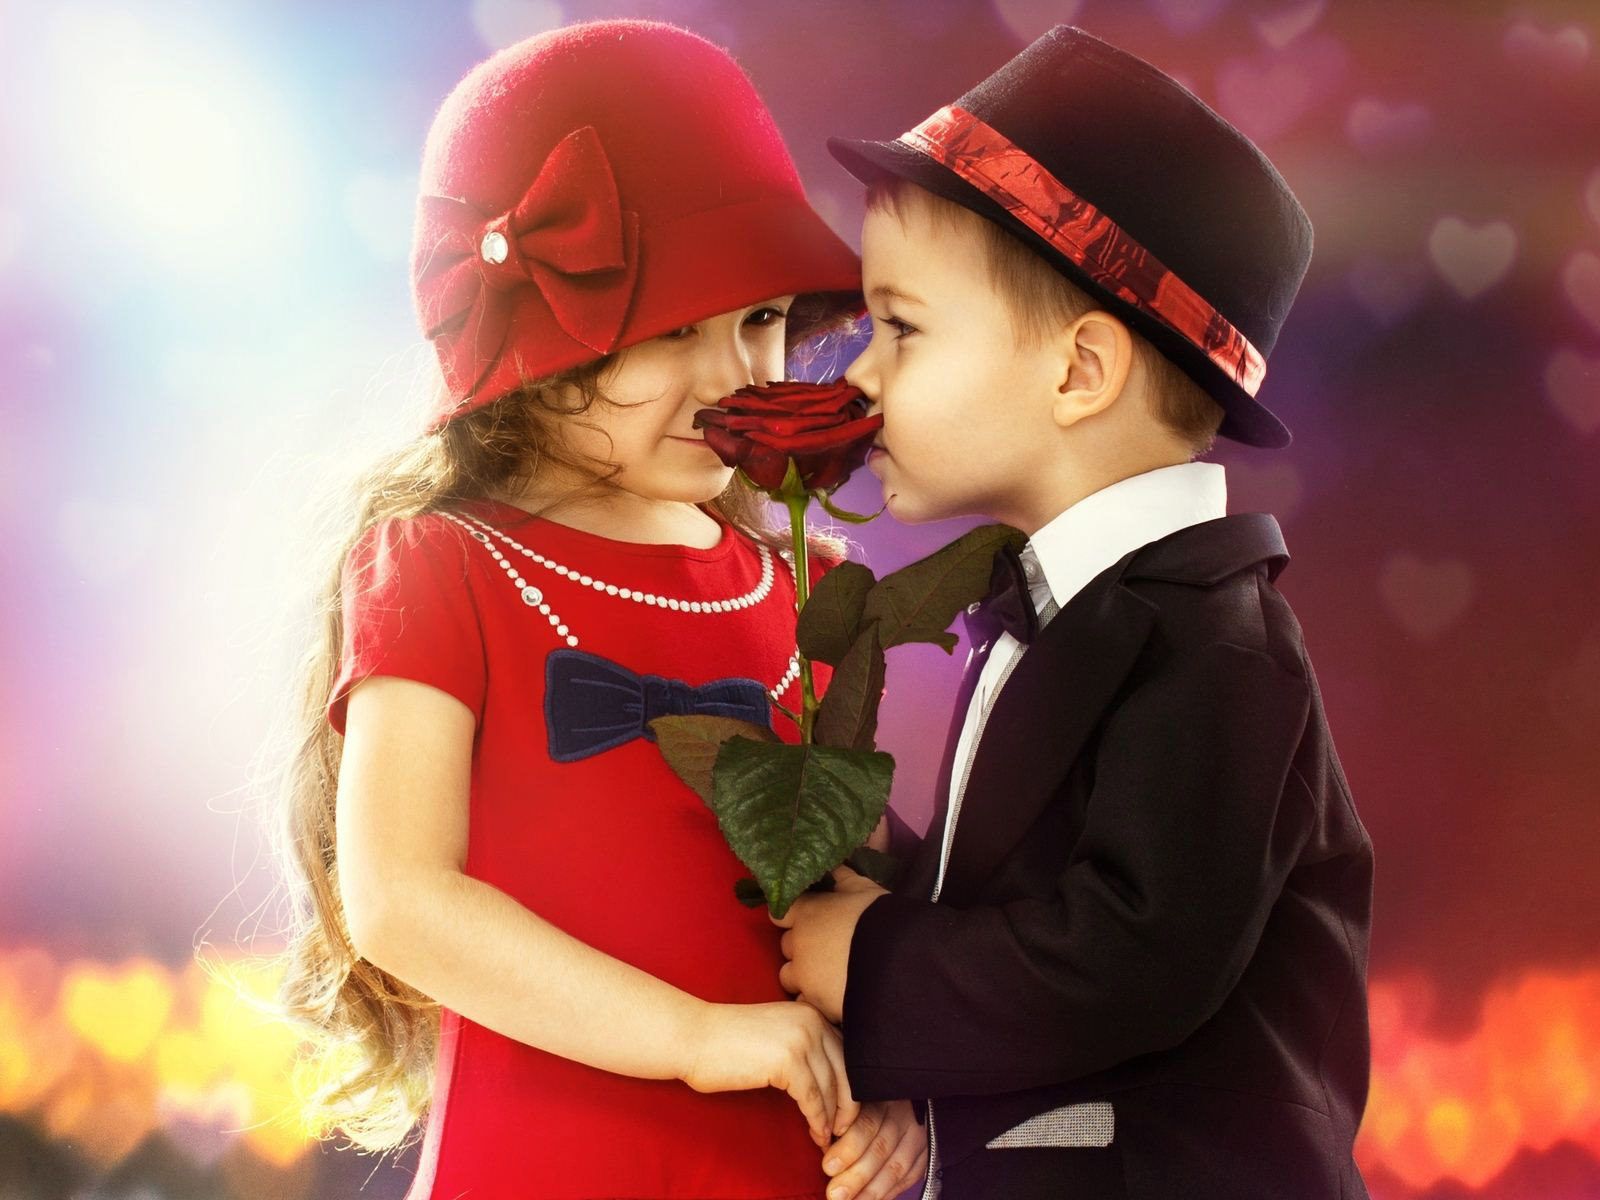 Valentines Day cute baby pic boy and girl love wallpaper HD, Wallpaper13.com